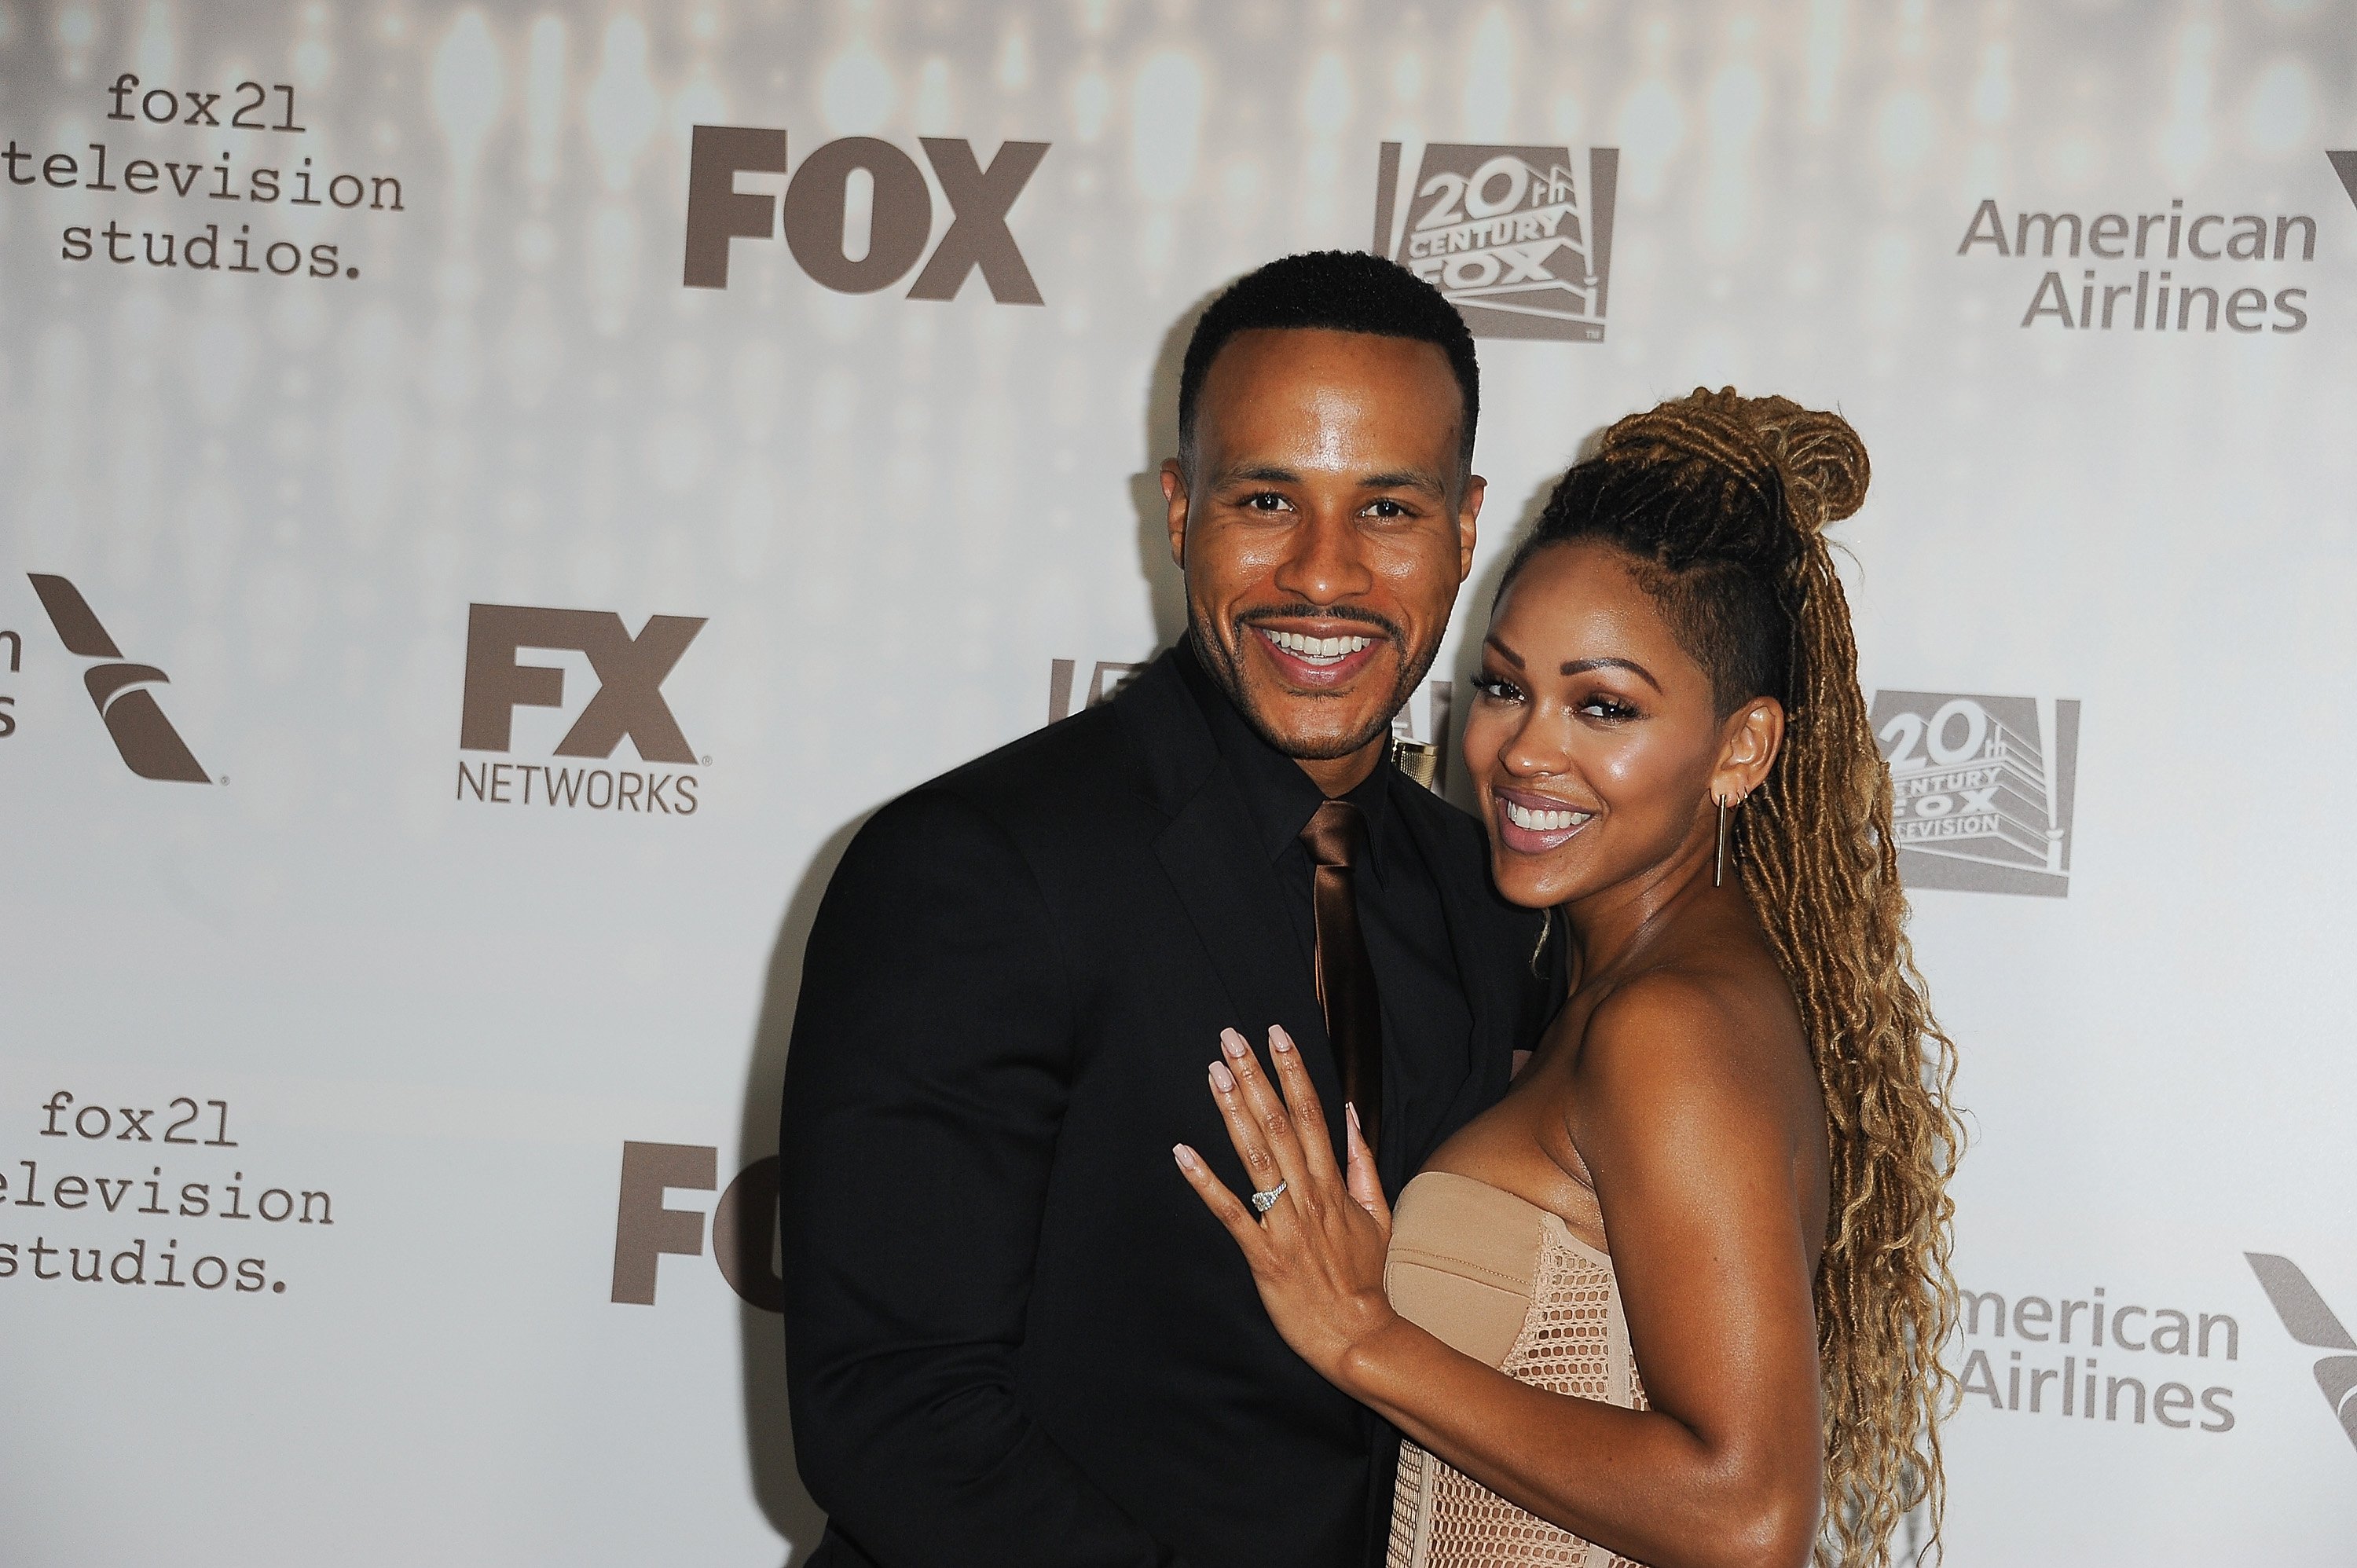 DeVon Franklin and Meagan Good at the 2017 Golden Globe Awards after-party.| Photo: Getty Images